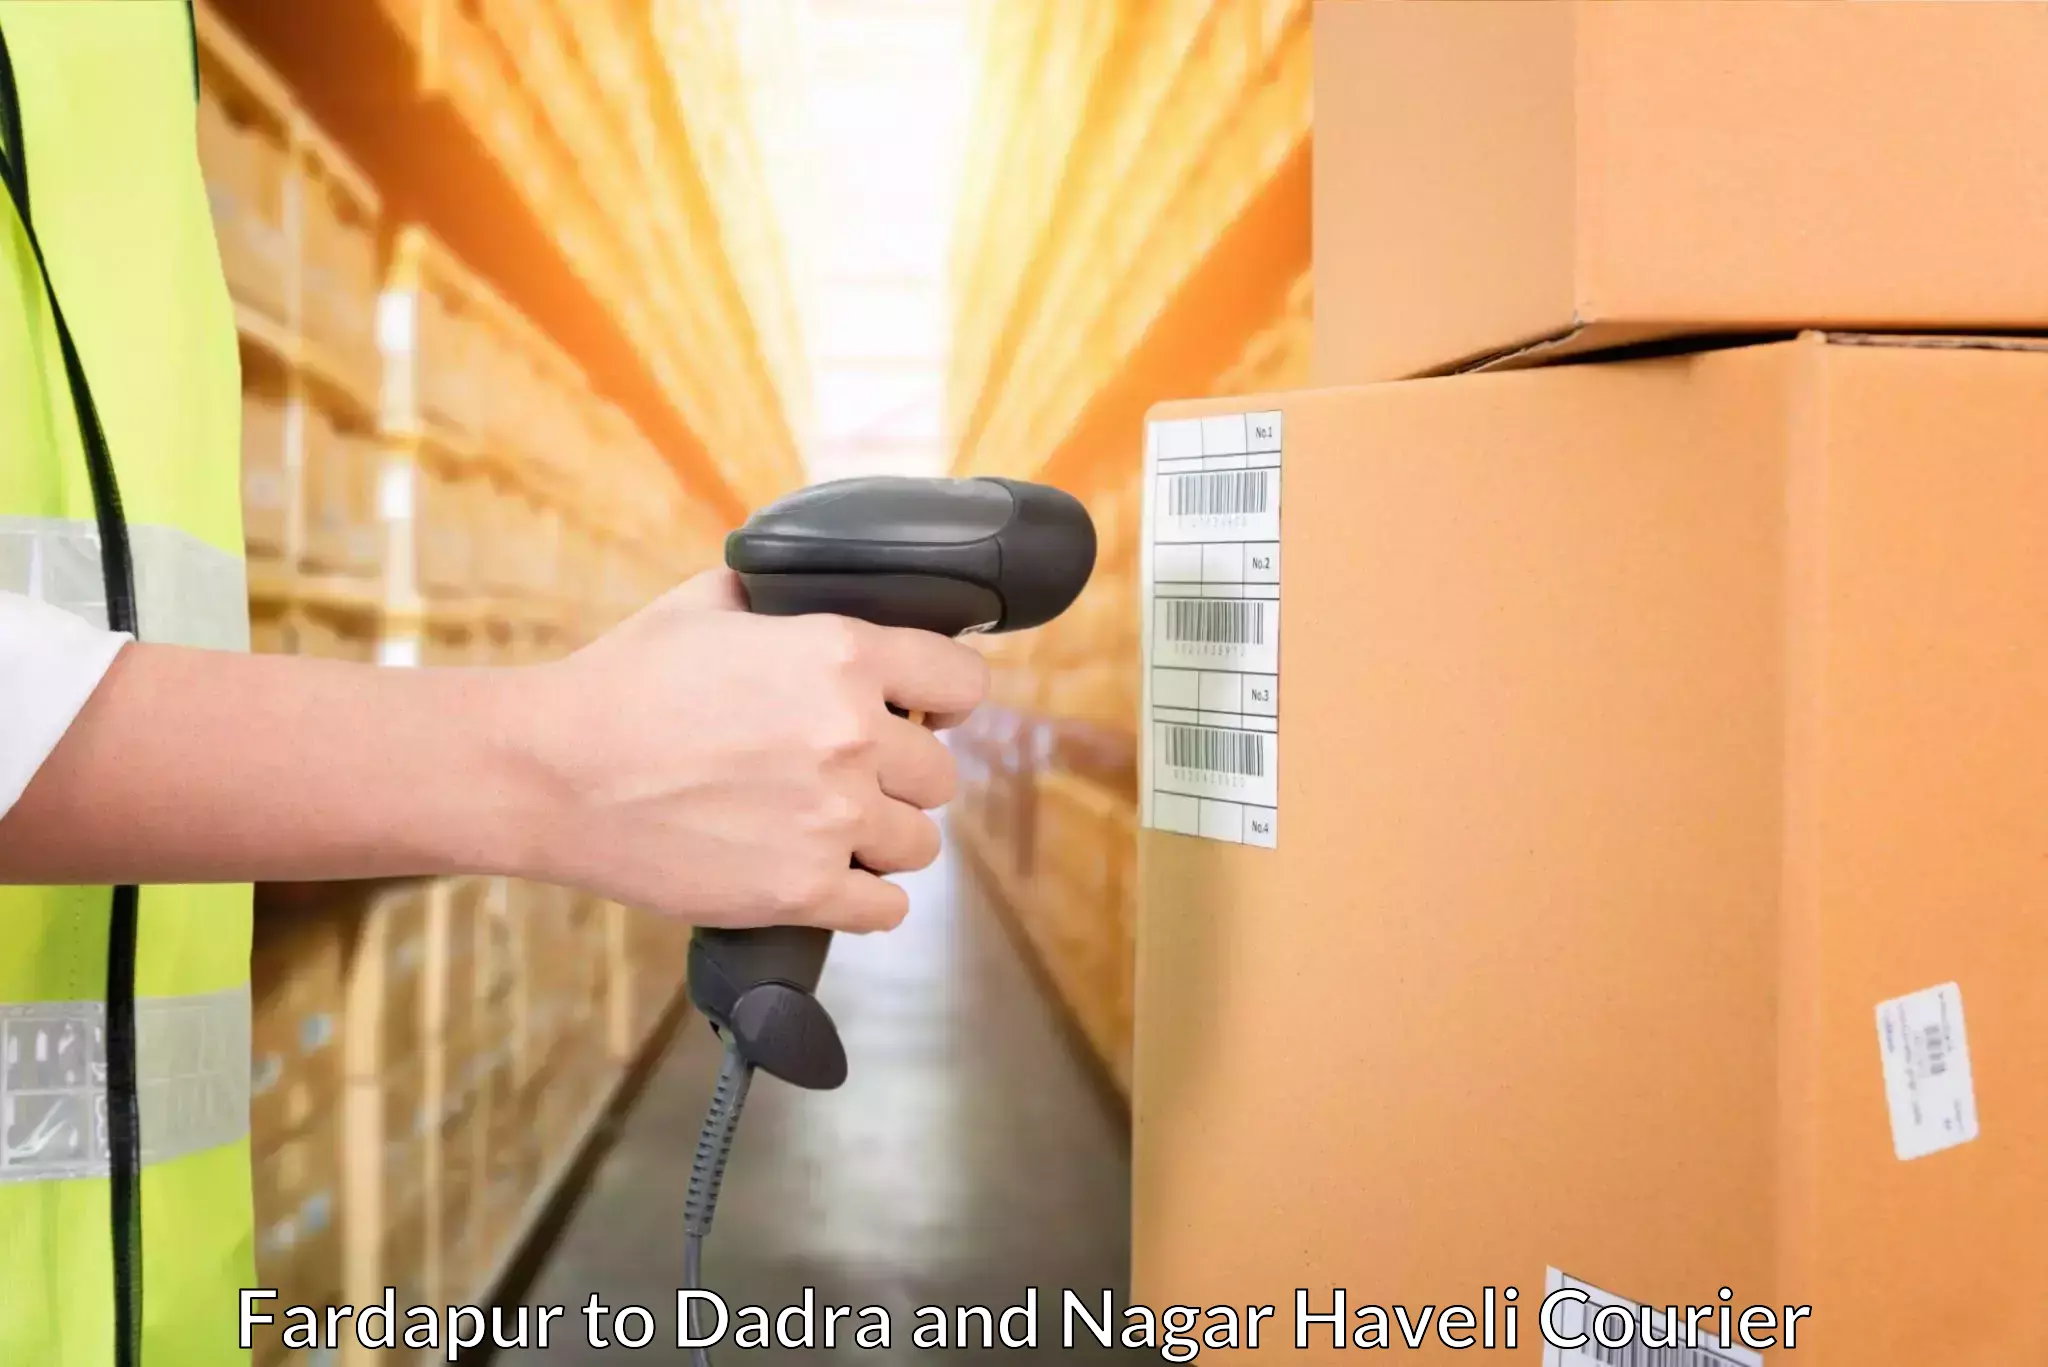 Quality courier services Fardapur to Dadra and Nagar Haveli